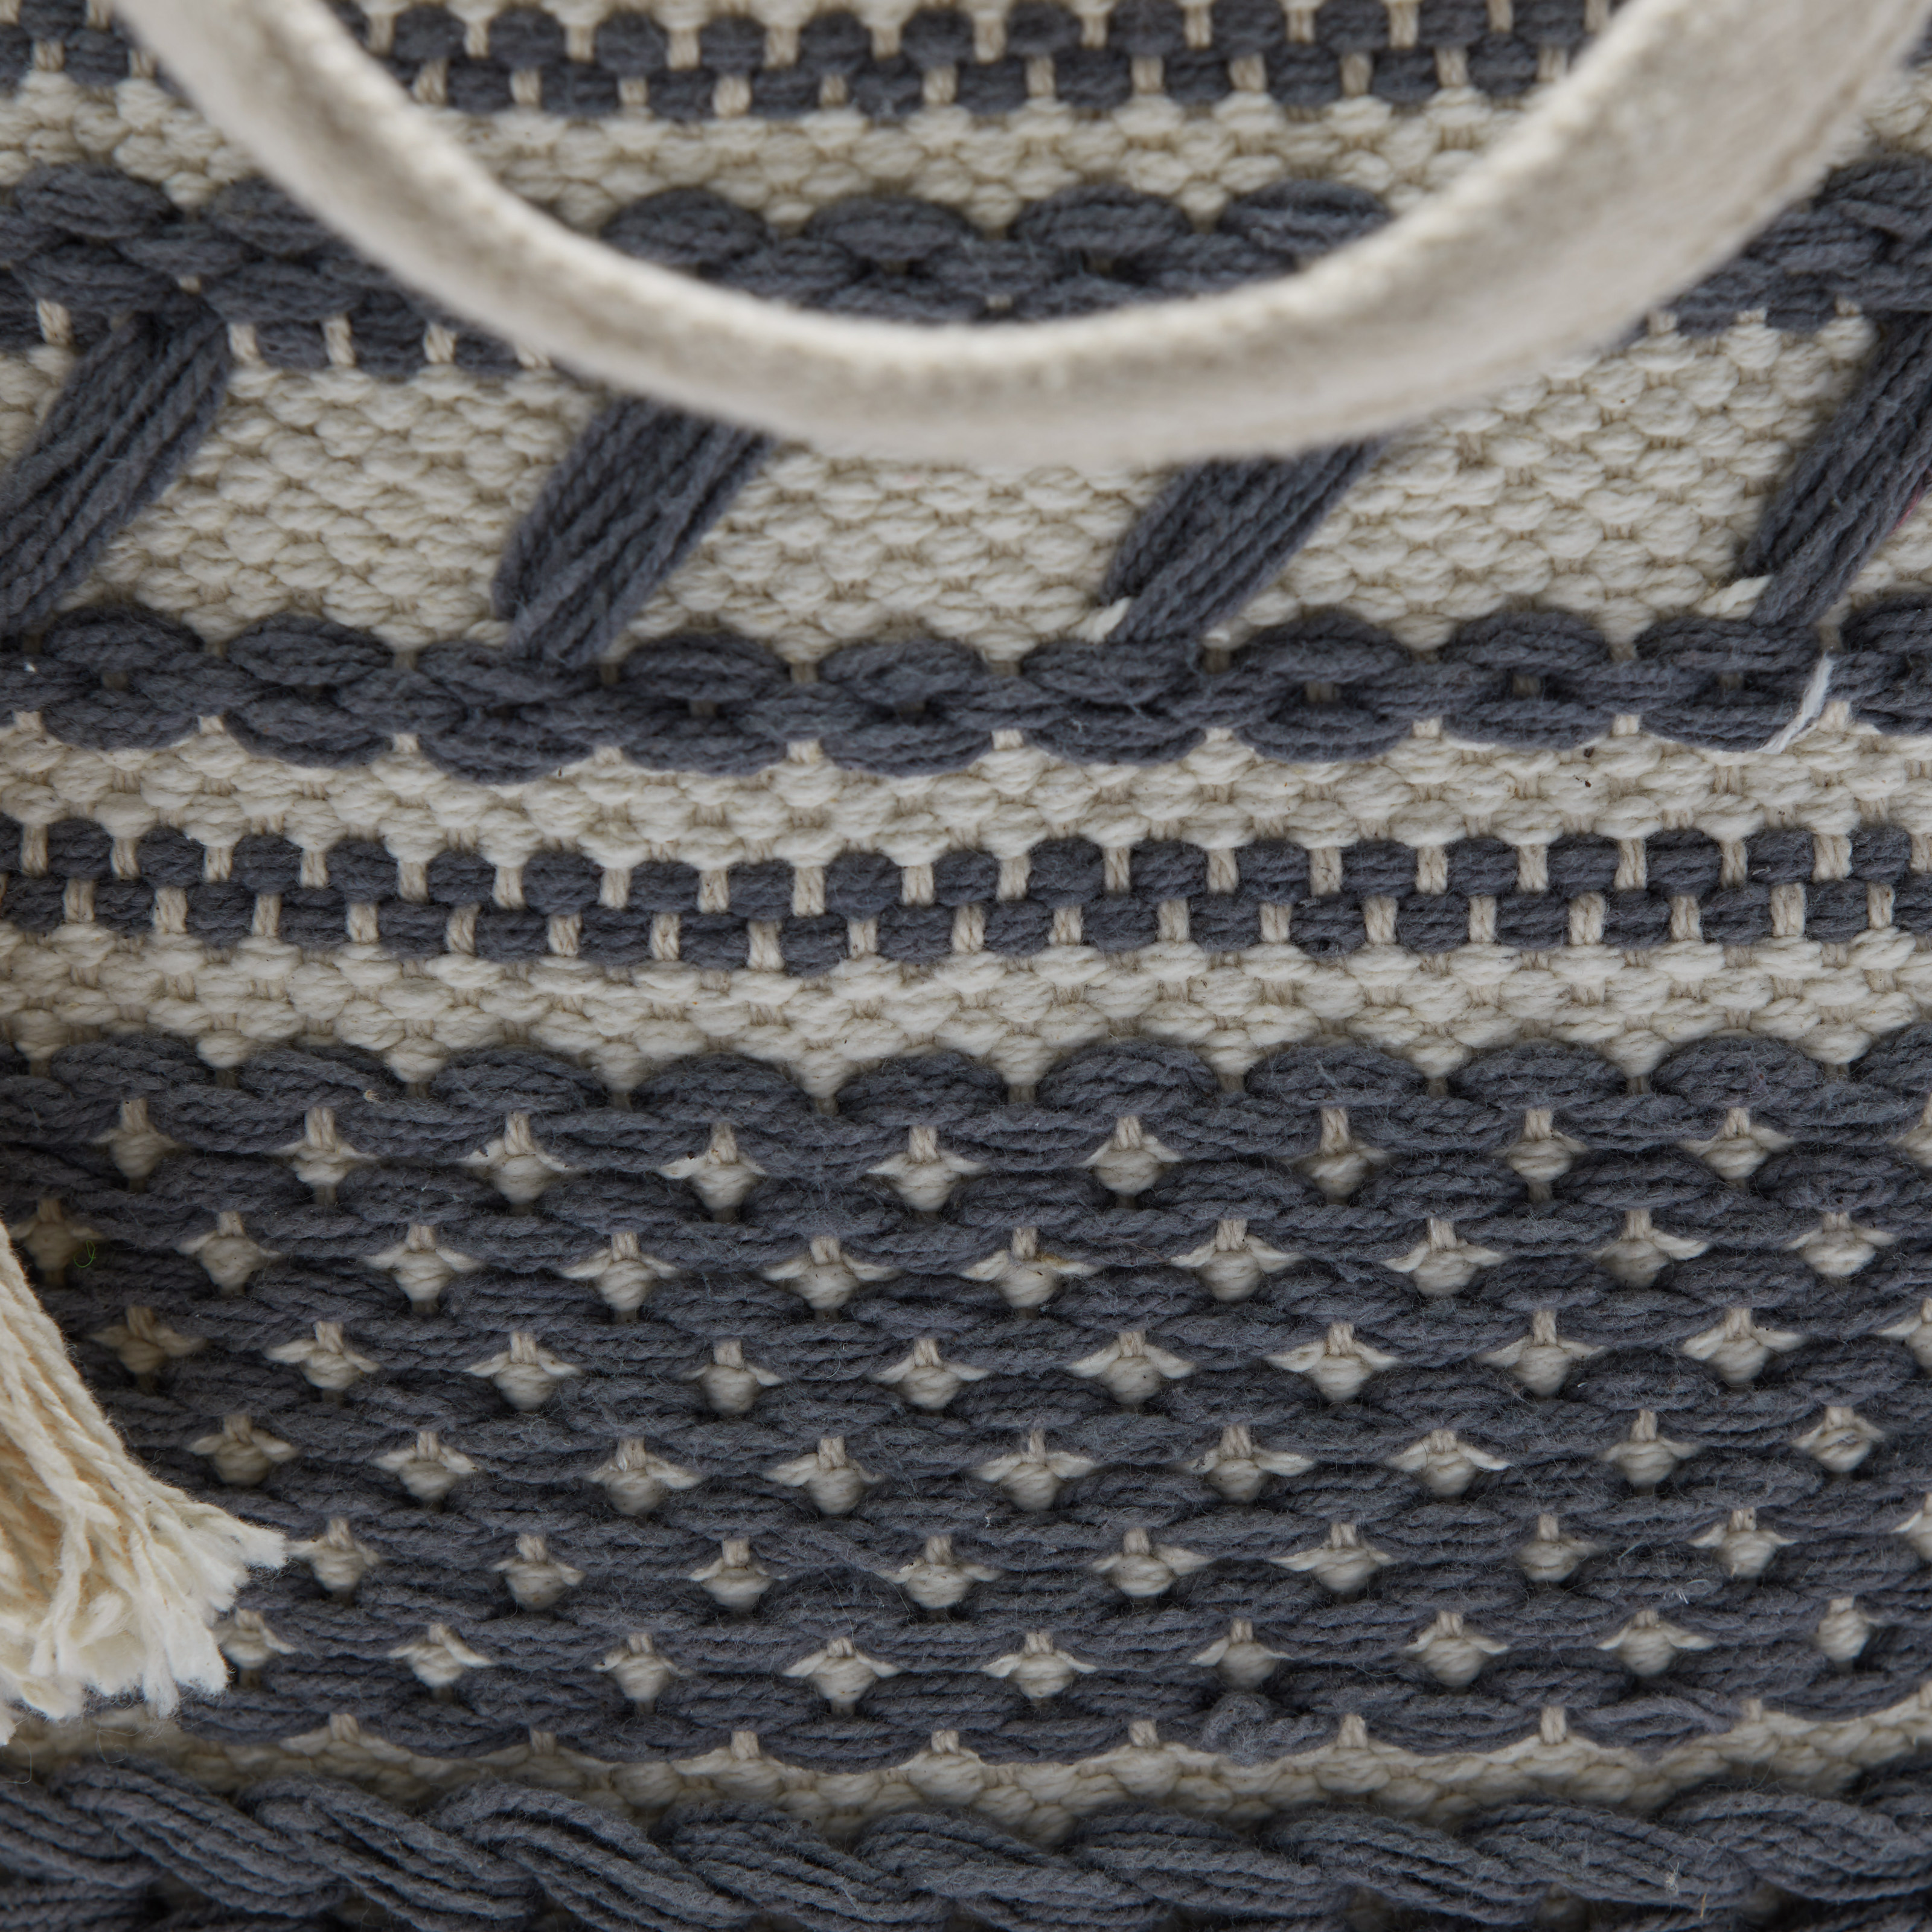 Hand Woven Macrame 3 Piece Basket Set, Natural and Charcoal by Drew Barrymore Flower Home - image 5 of 10